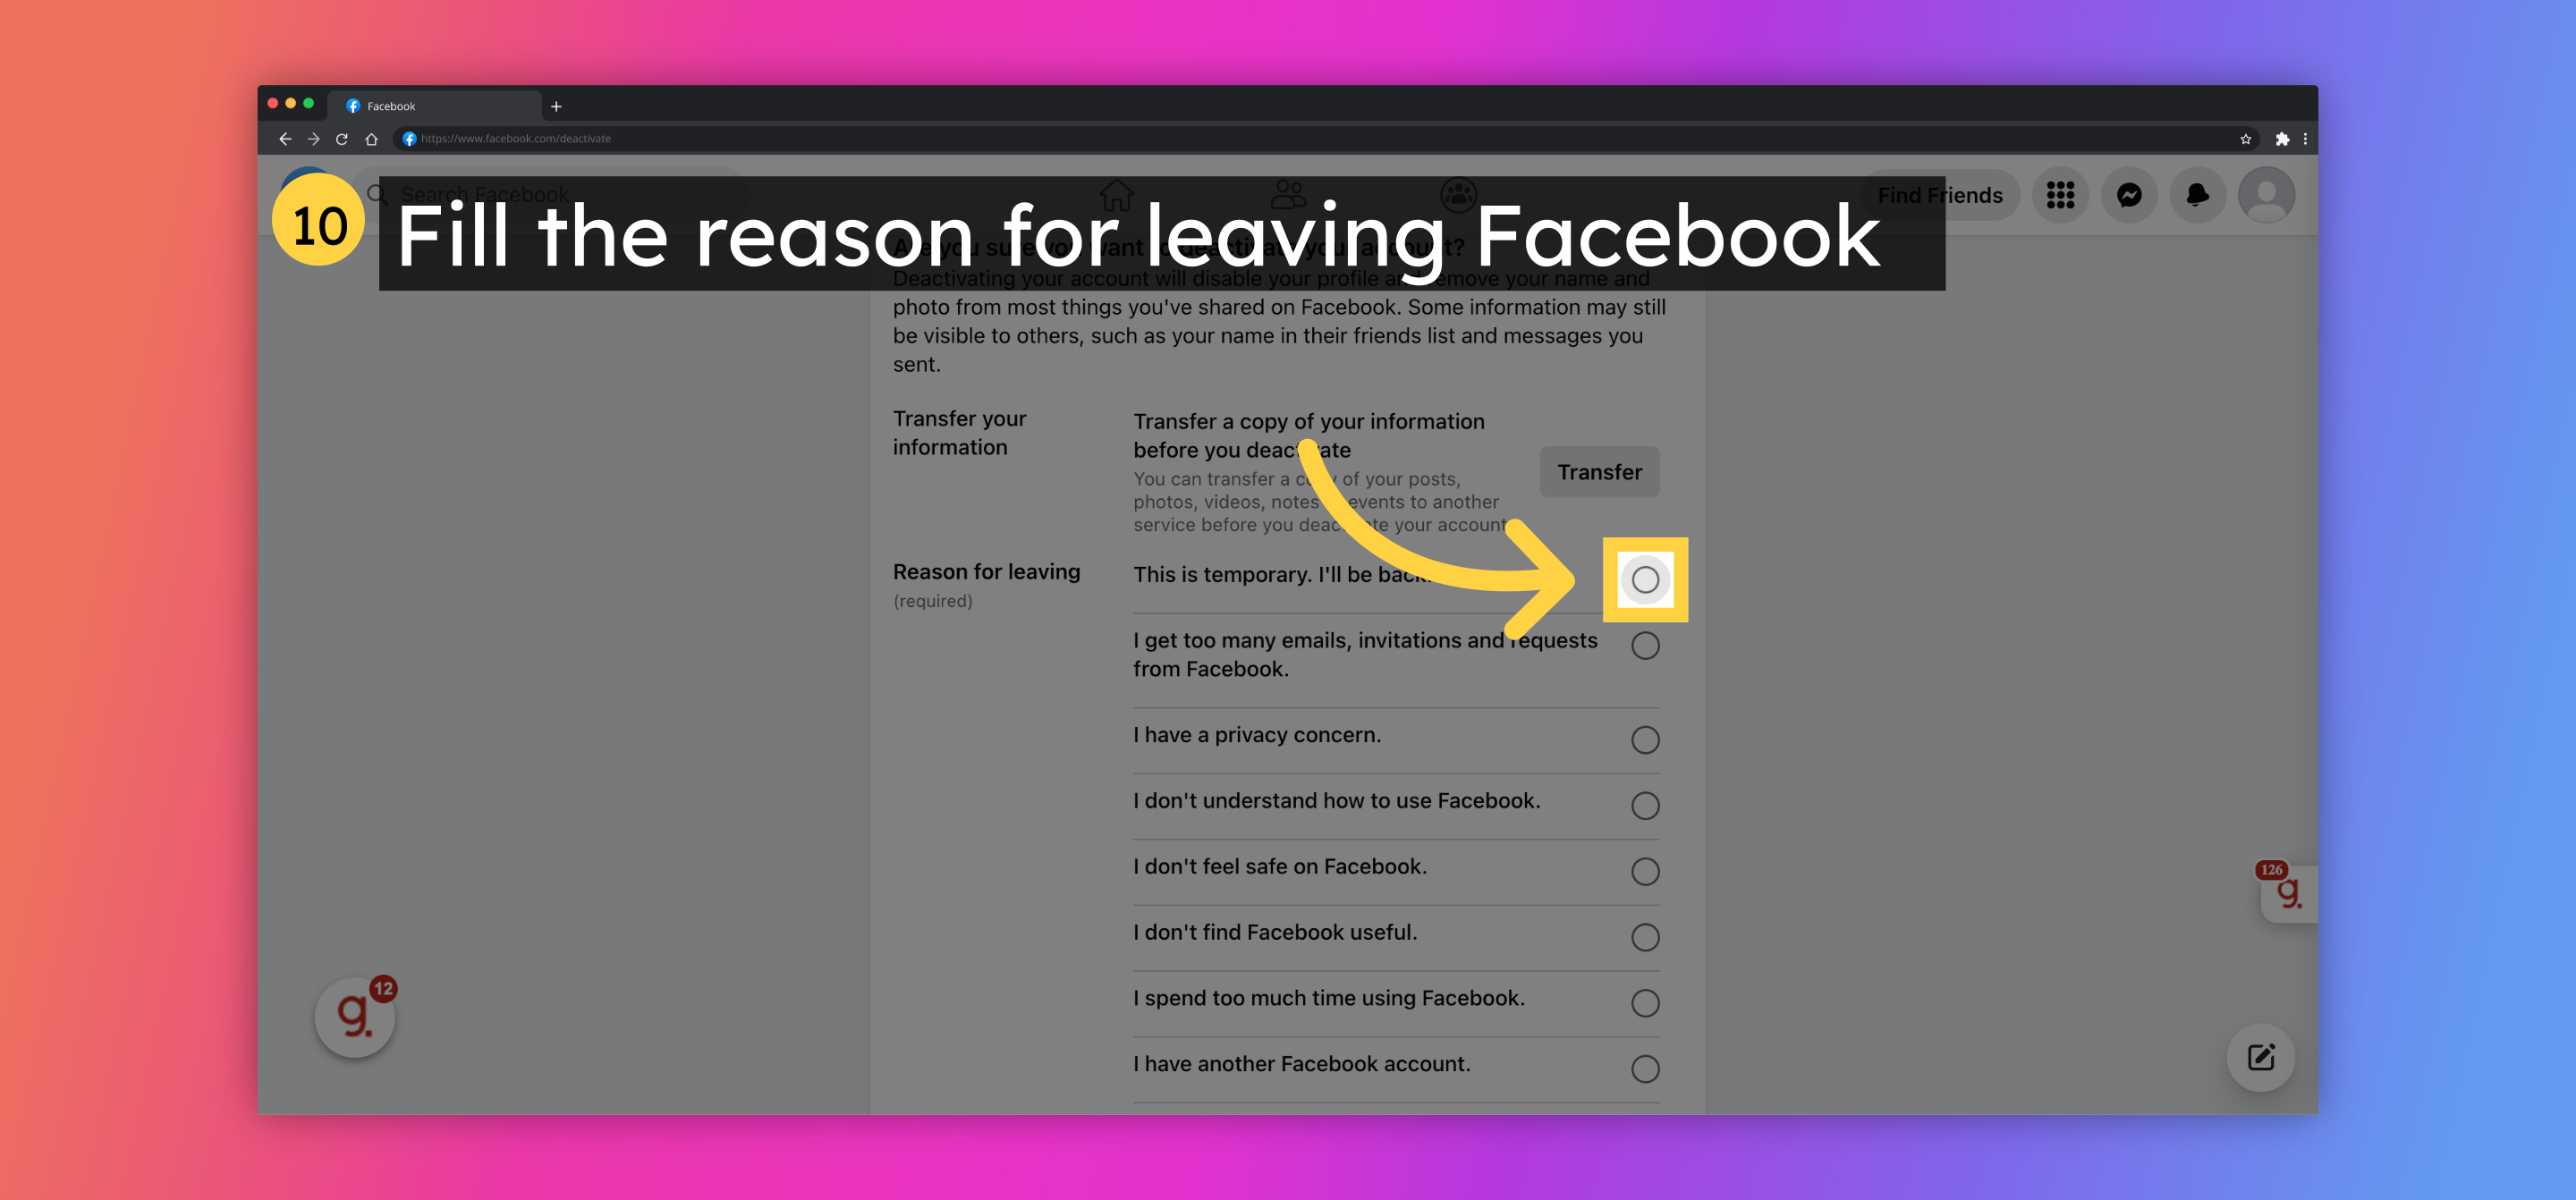 Fill the reason for leaving Facebook